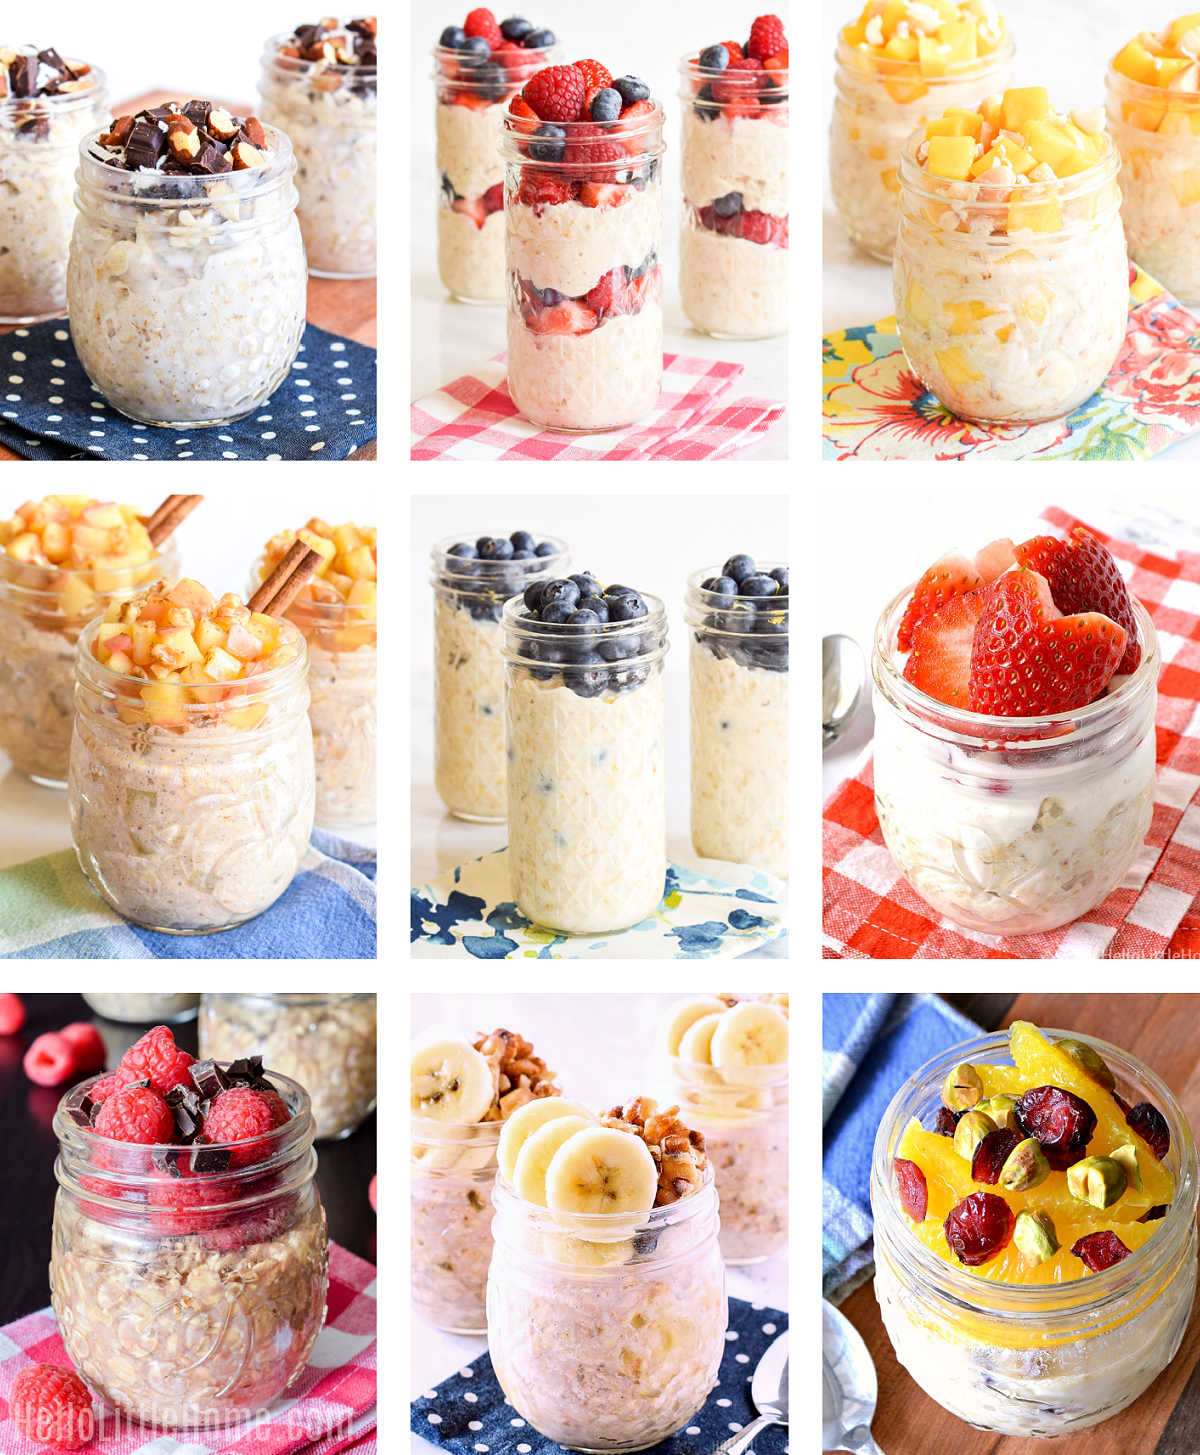 A photo collage showing 9 different Overnight Oats flavors.